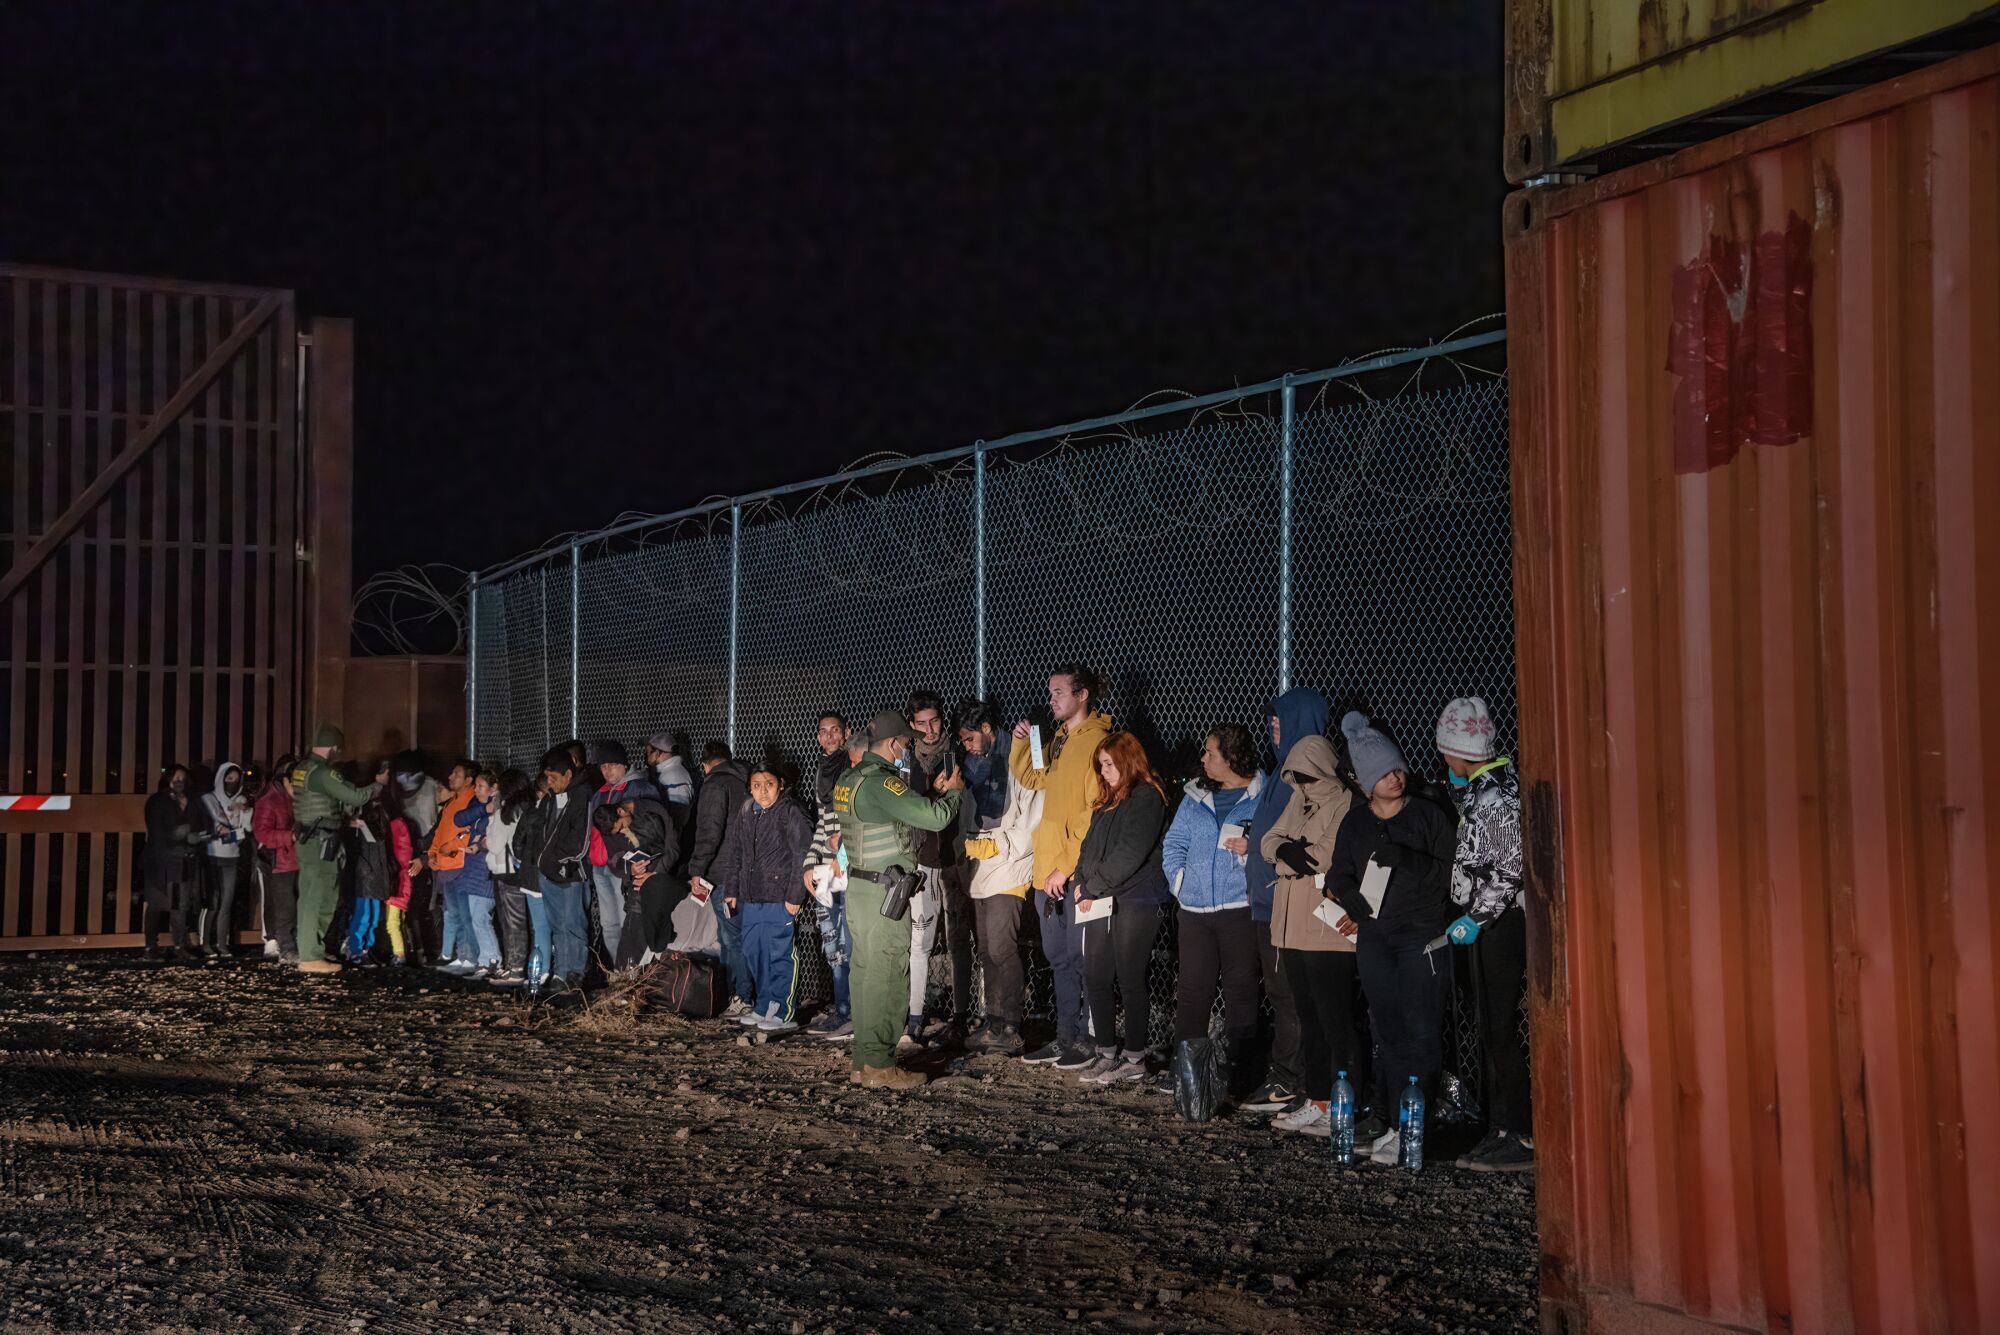 Two U.S. Border Patrol agents photograph part of about 100 people who surrendered after crossing the Mexico/Arizona border